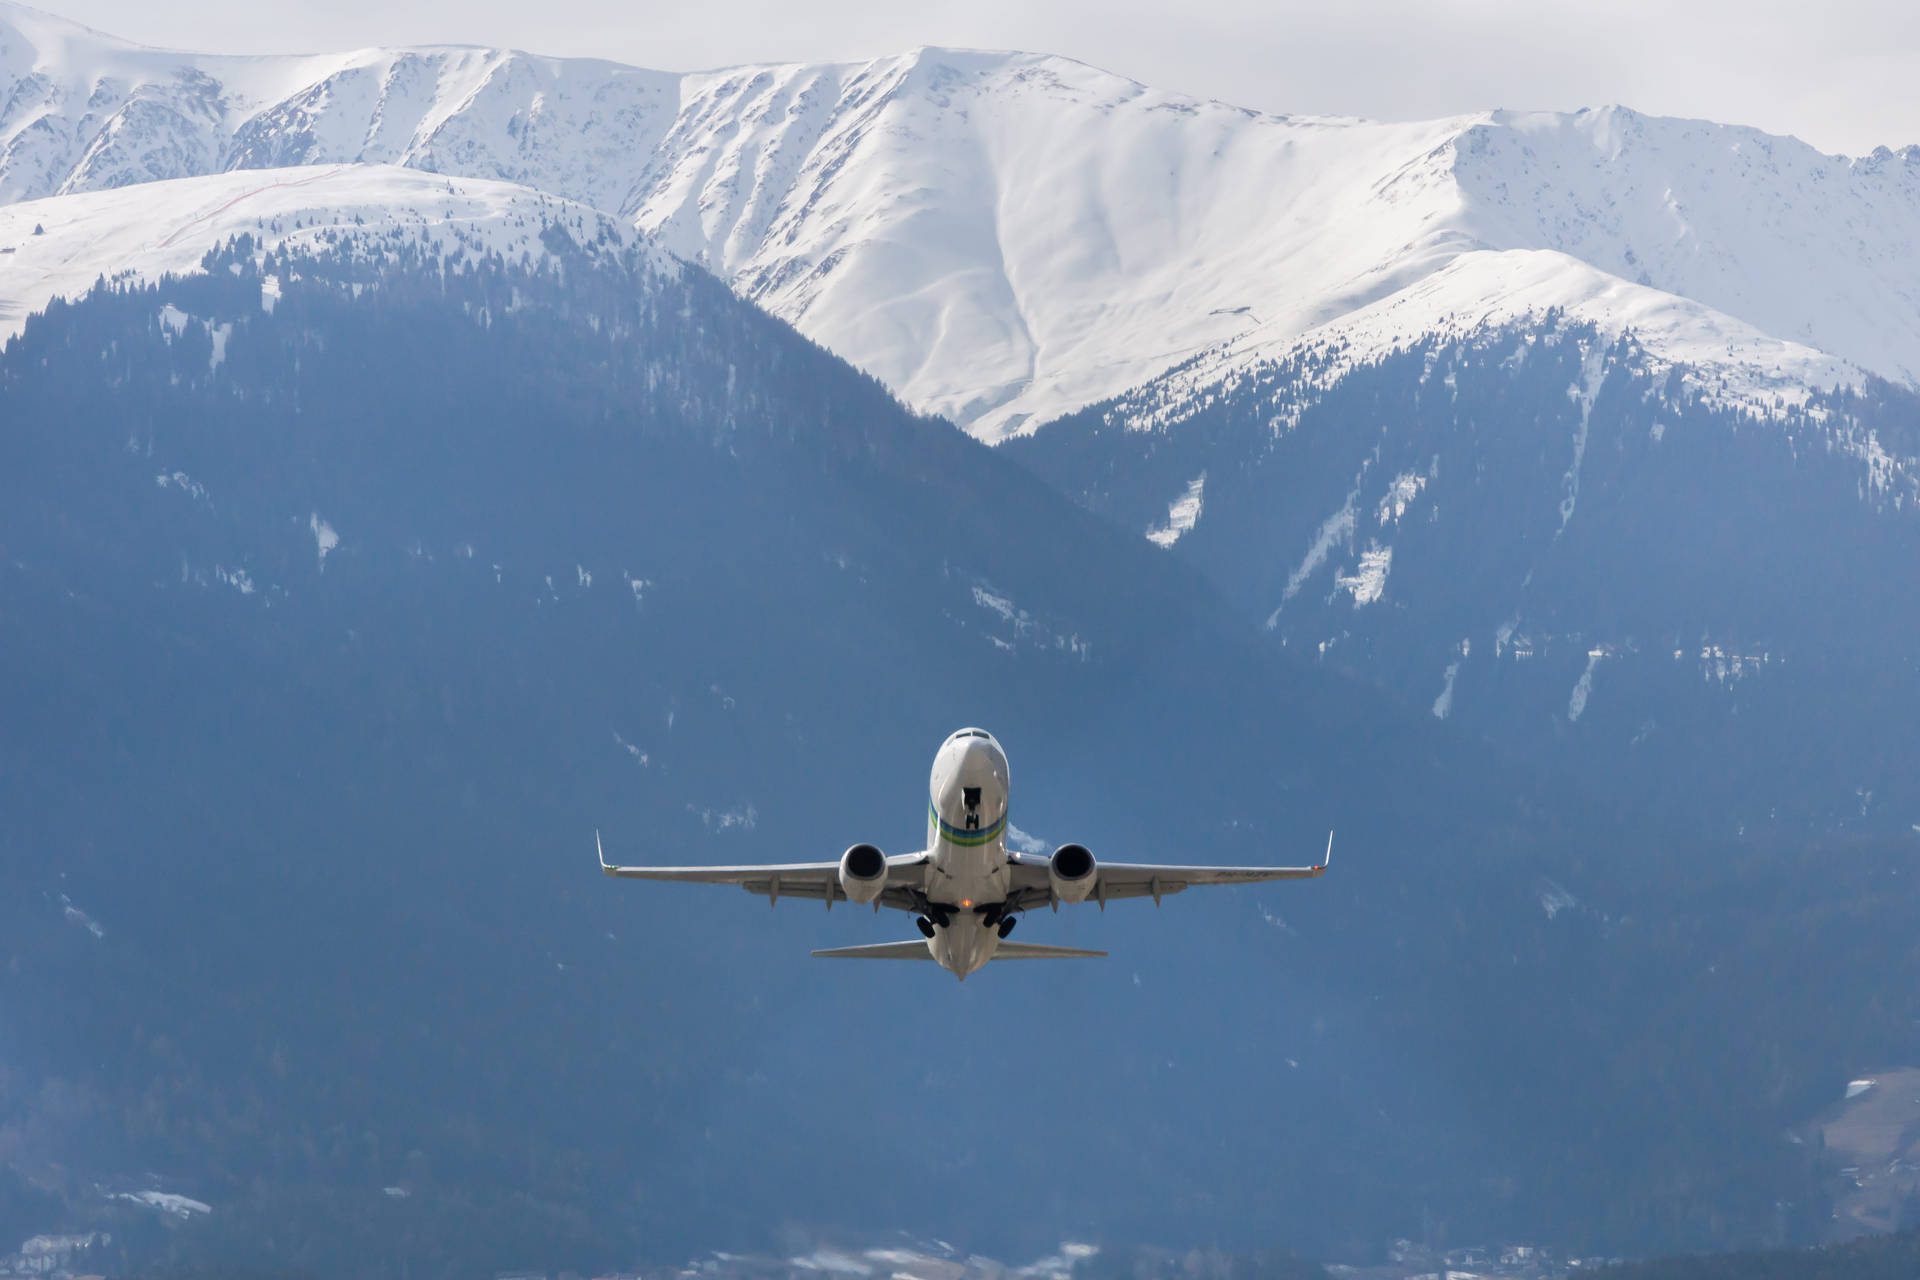 Hd Plane Flying Snowy Mountains